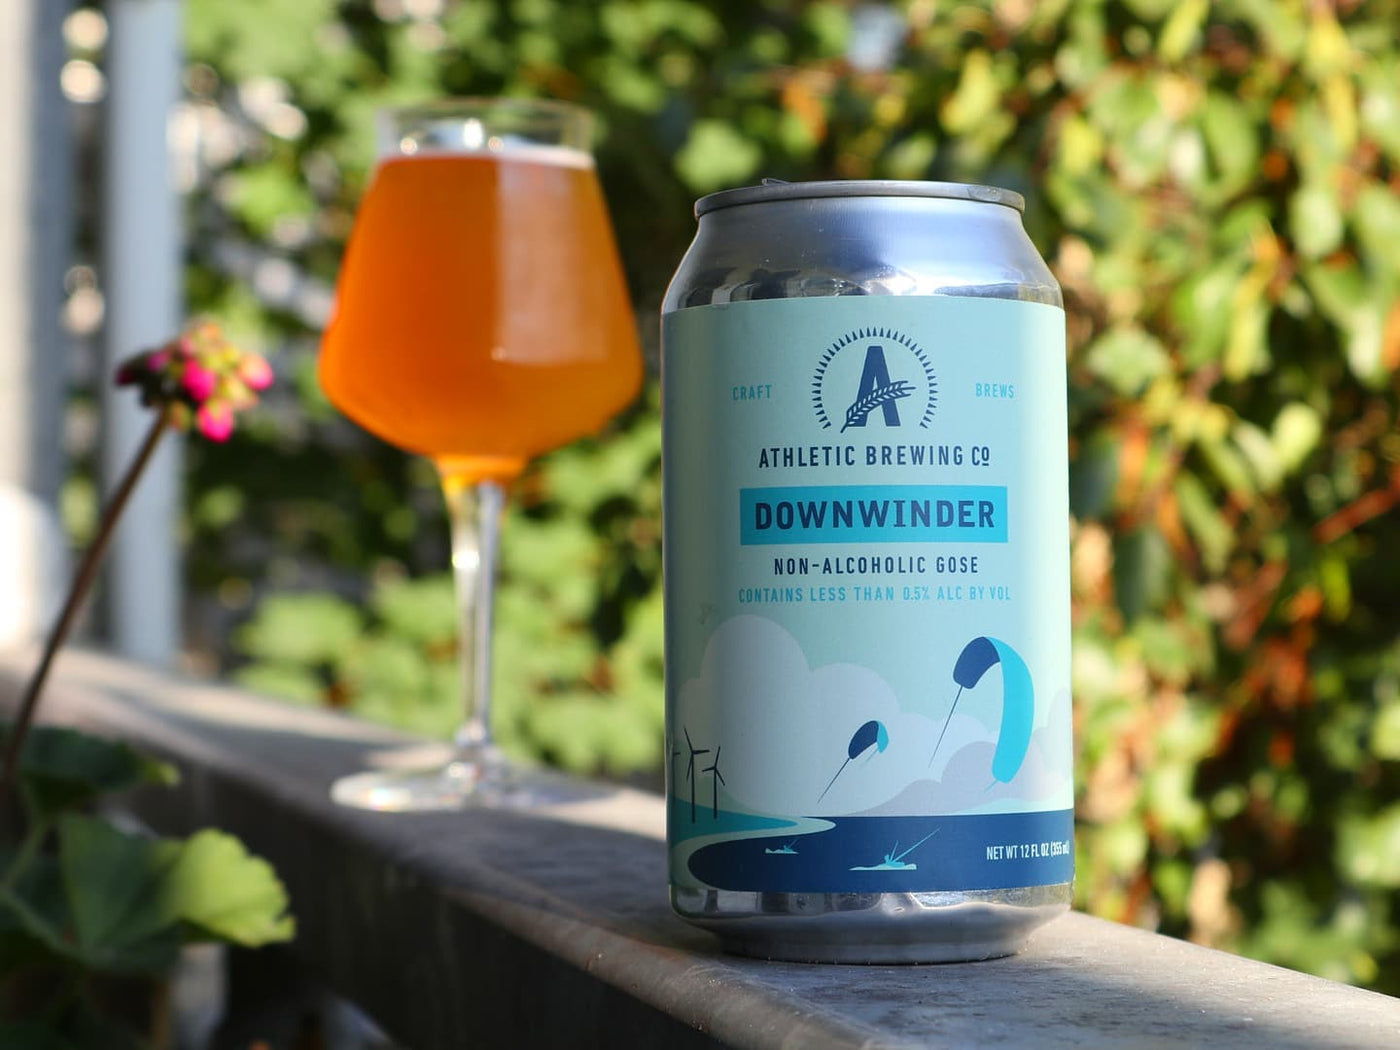 Athletic Brewing Downwinder Gose Non Alcoholic Beer Vegan Non-GMO at The Sobr Market